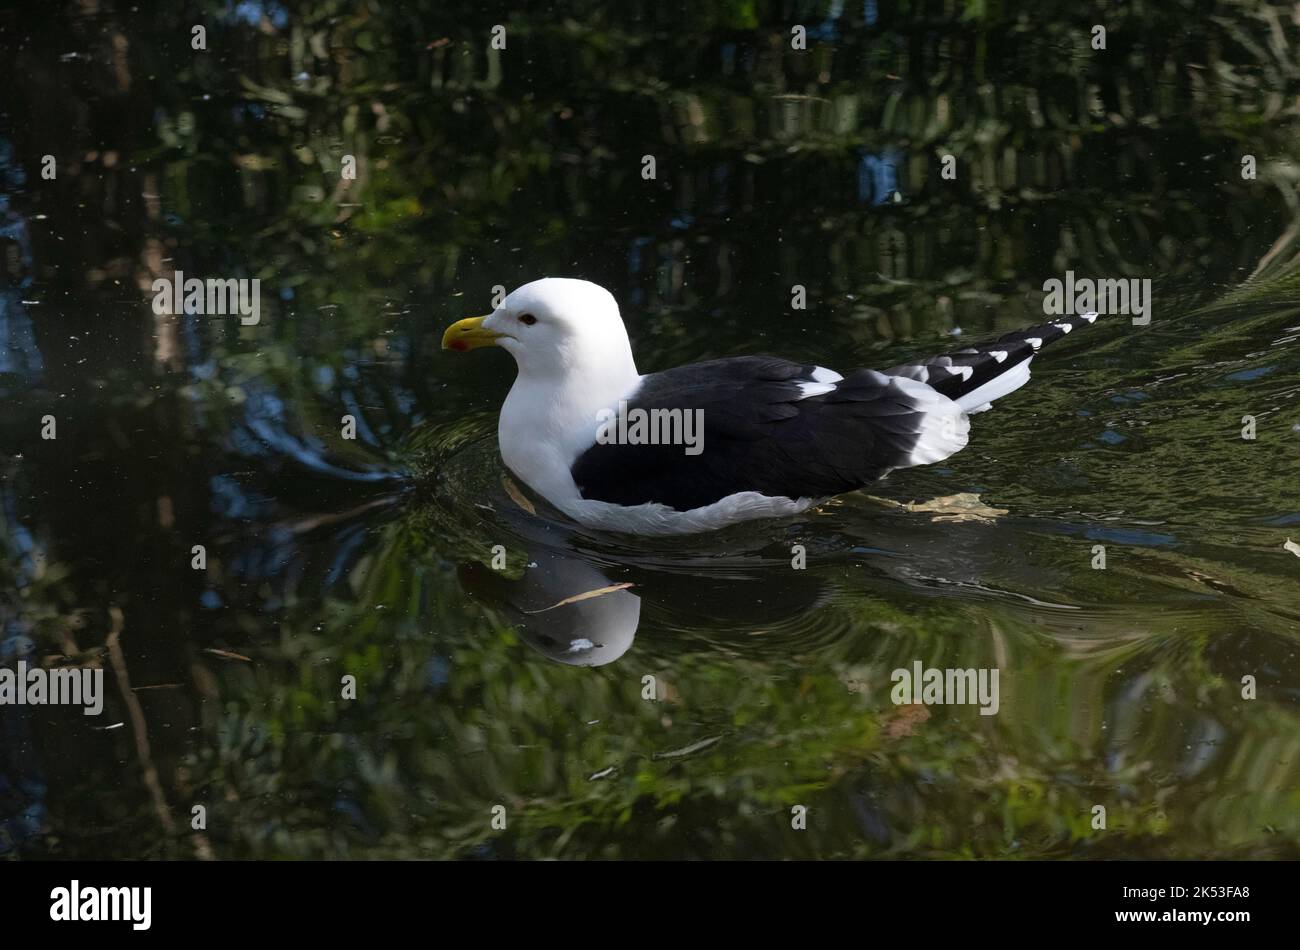 A Kelp Gull (Larus dominicanus) swimming at Featherdale Wildlife Park in Sydney, New South Wales (NSW), Australia (Photo by Tara Chand Malhotra) Stock Photo